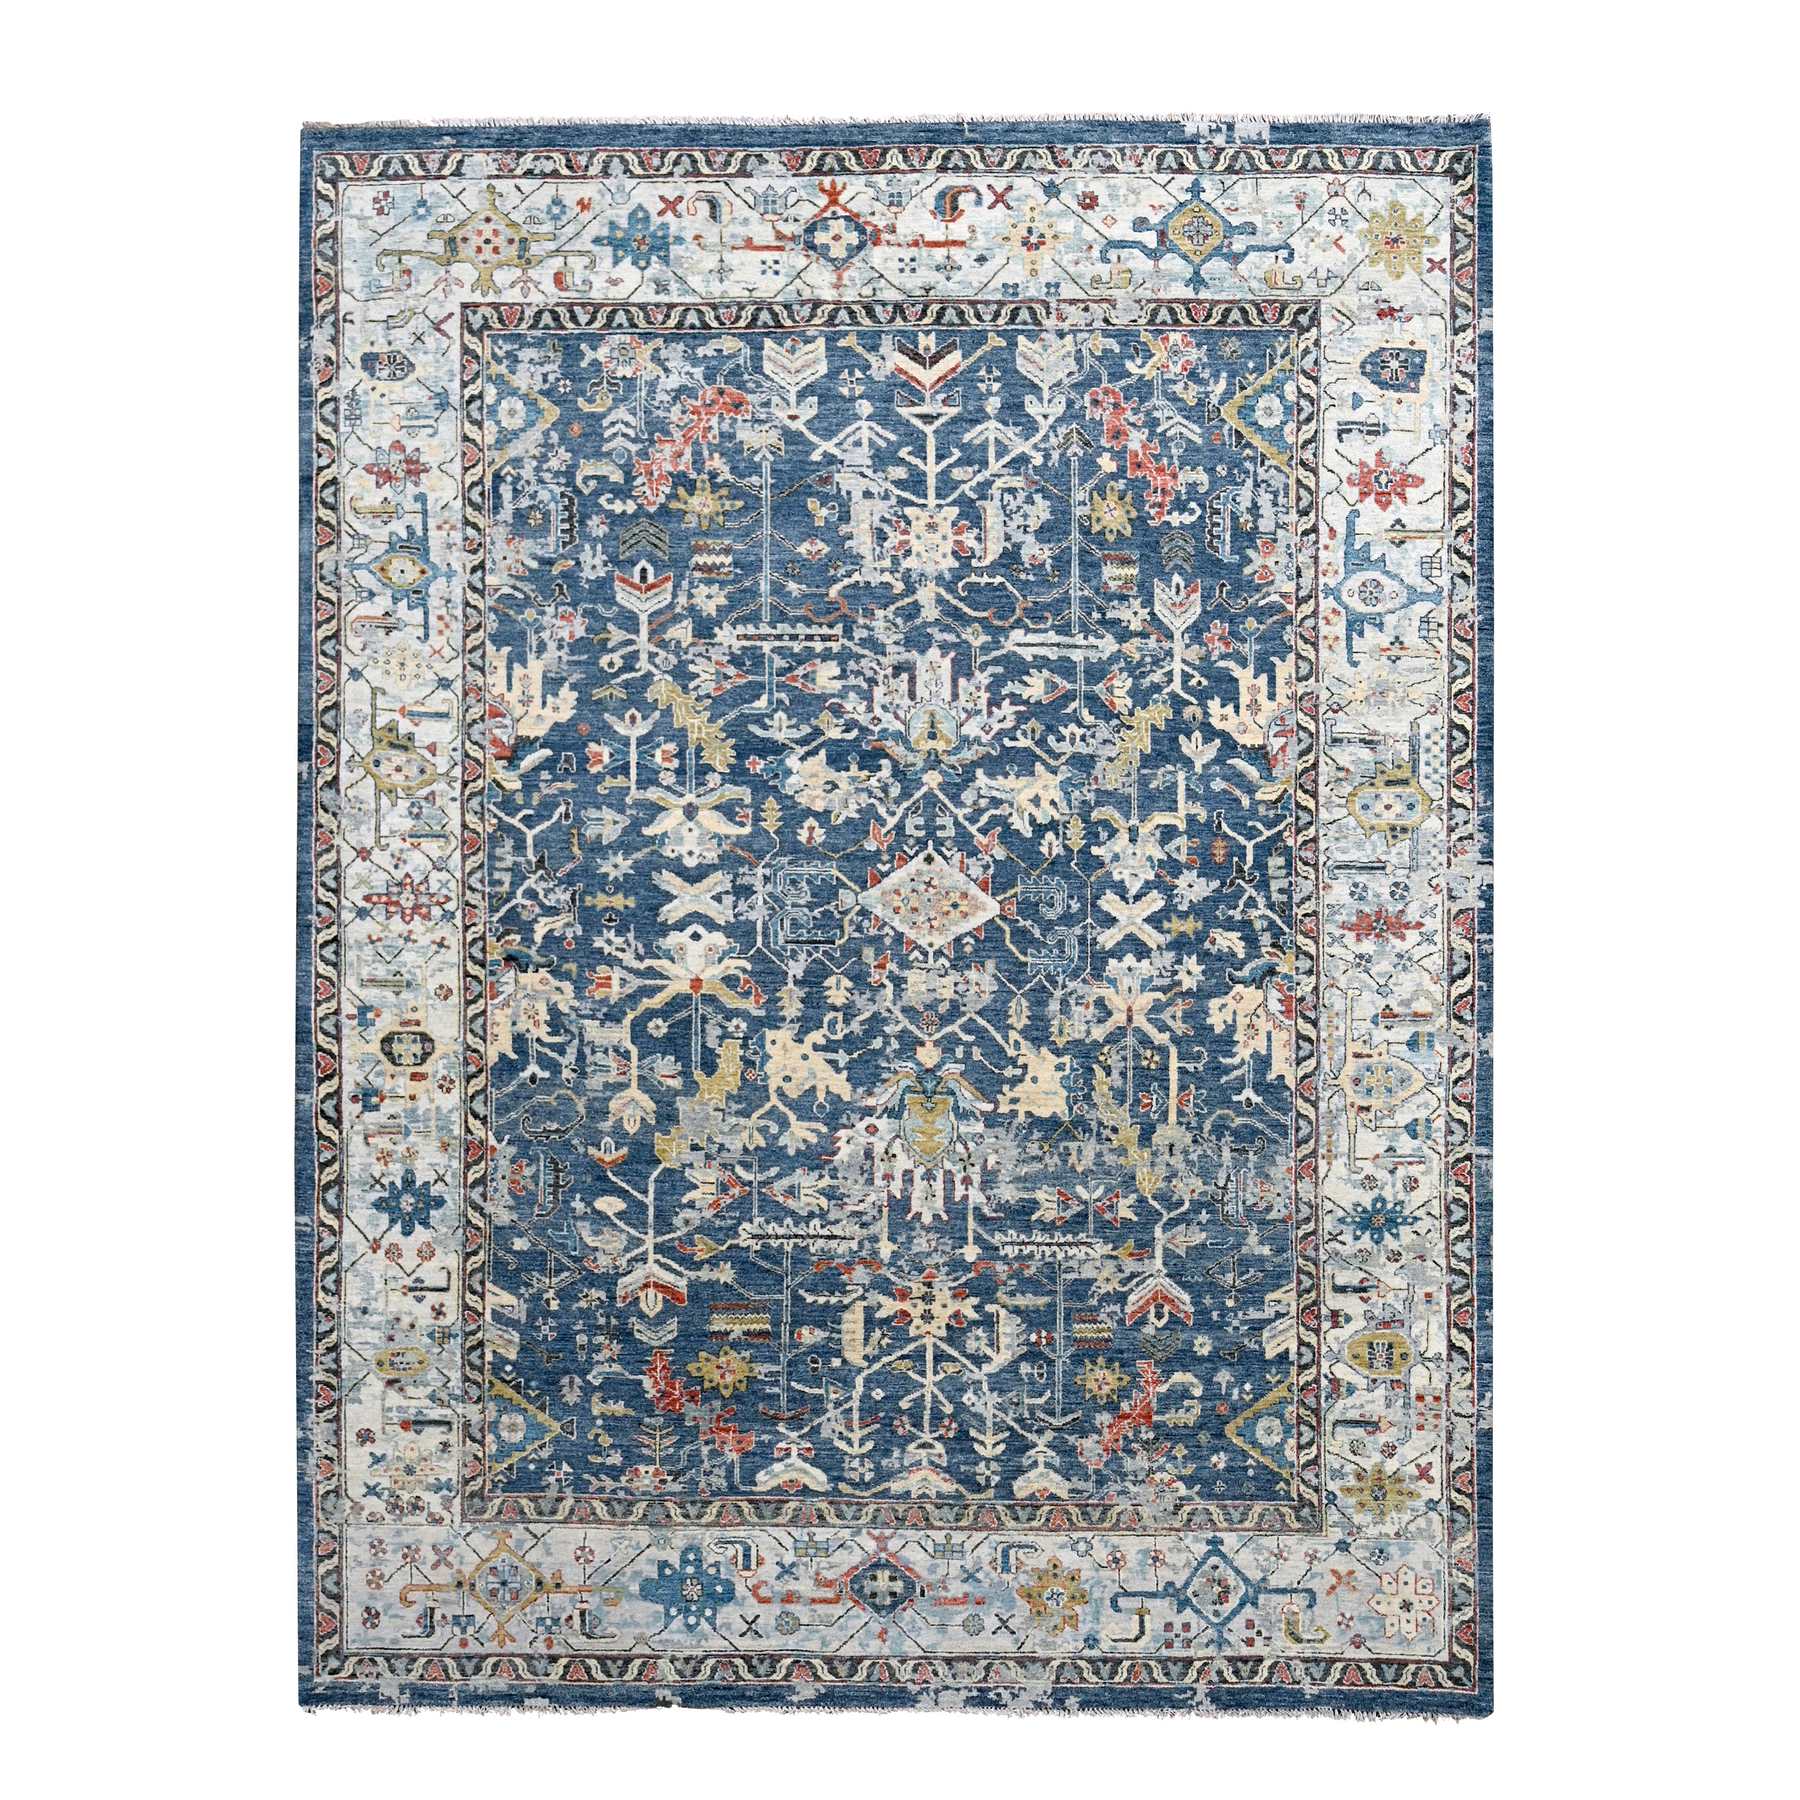 Meditative Blue, Densely Woven, Broken and Erased Hand Knotted Persian Heriz All Over Design With Soft Color Palette, Shiny Wool, Oriental Rug